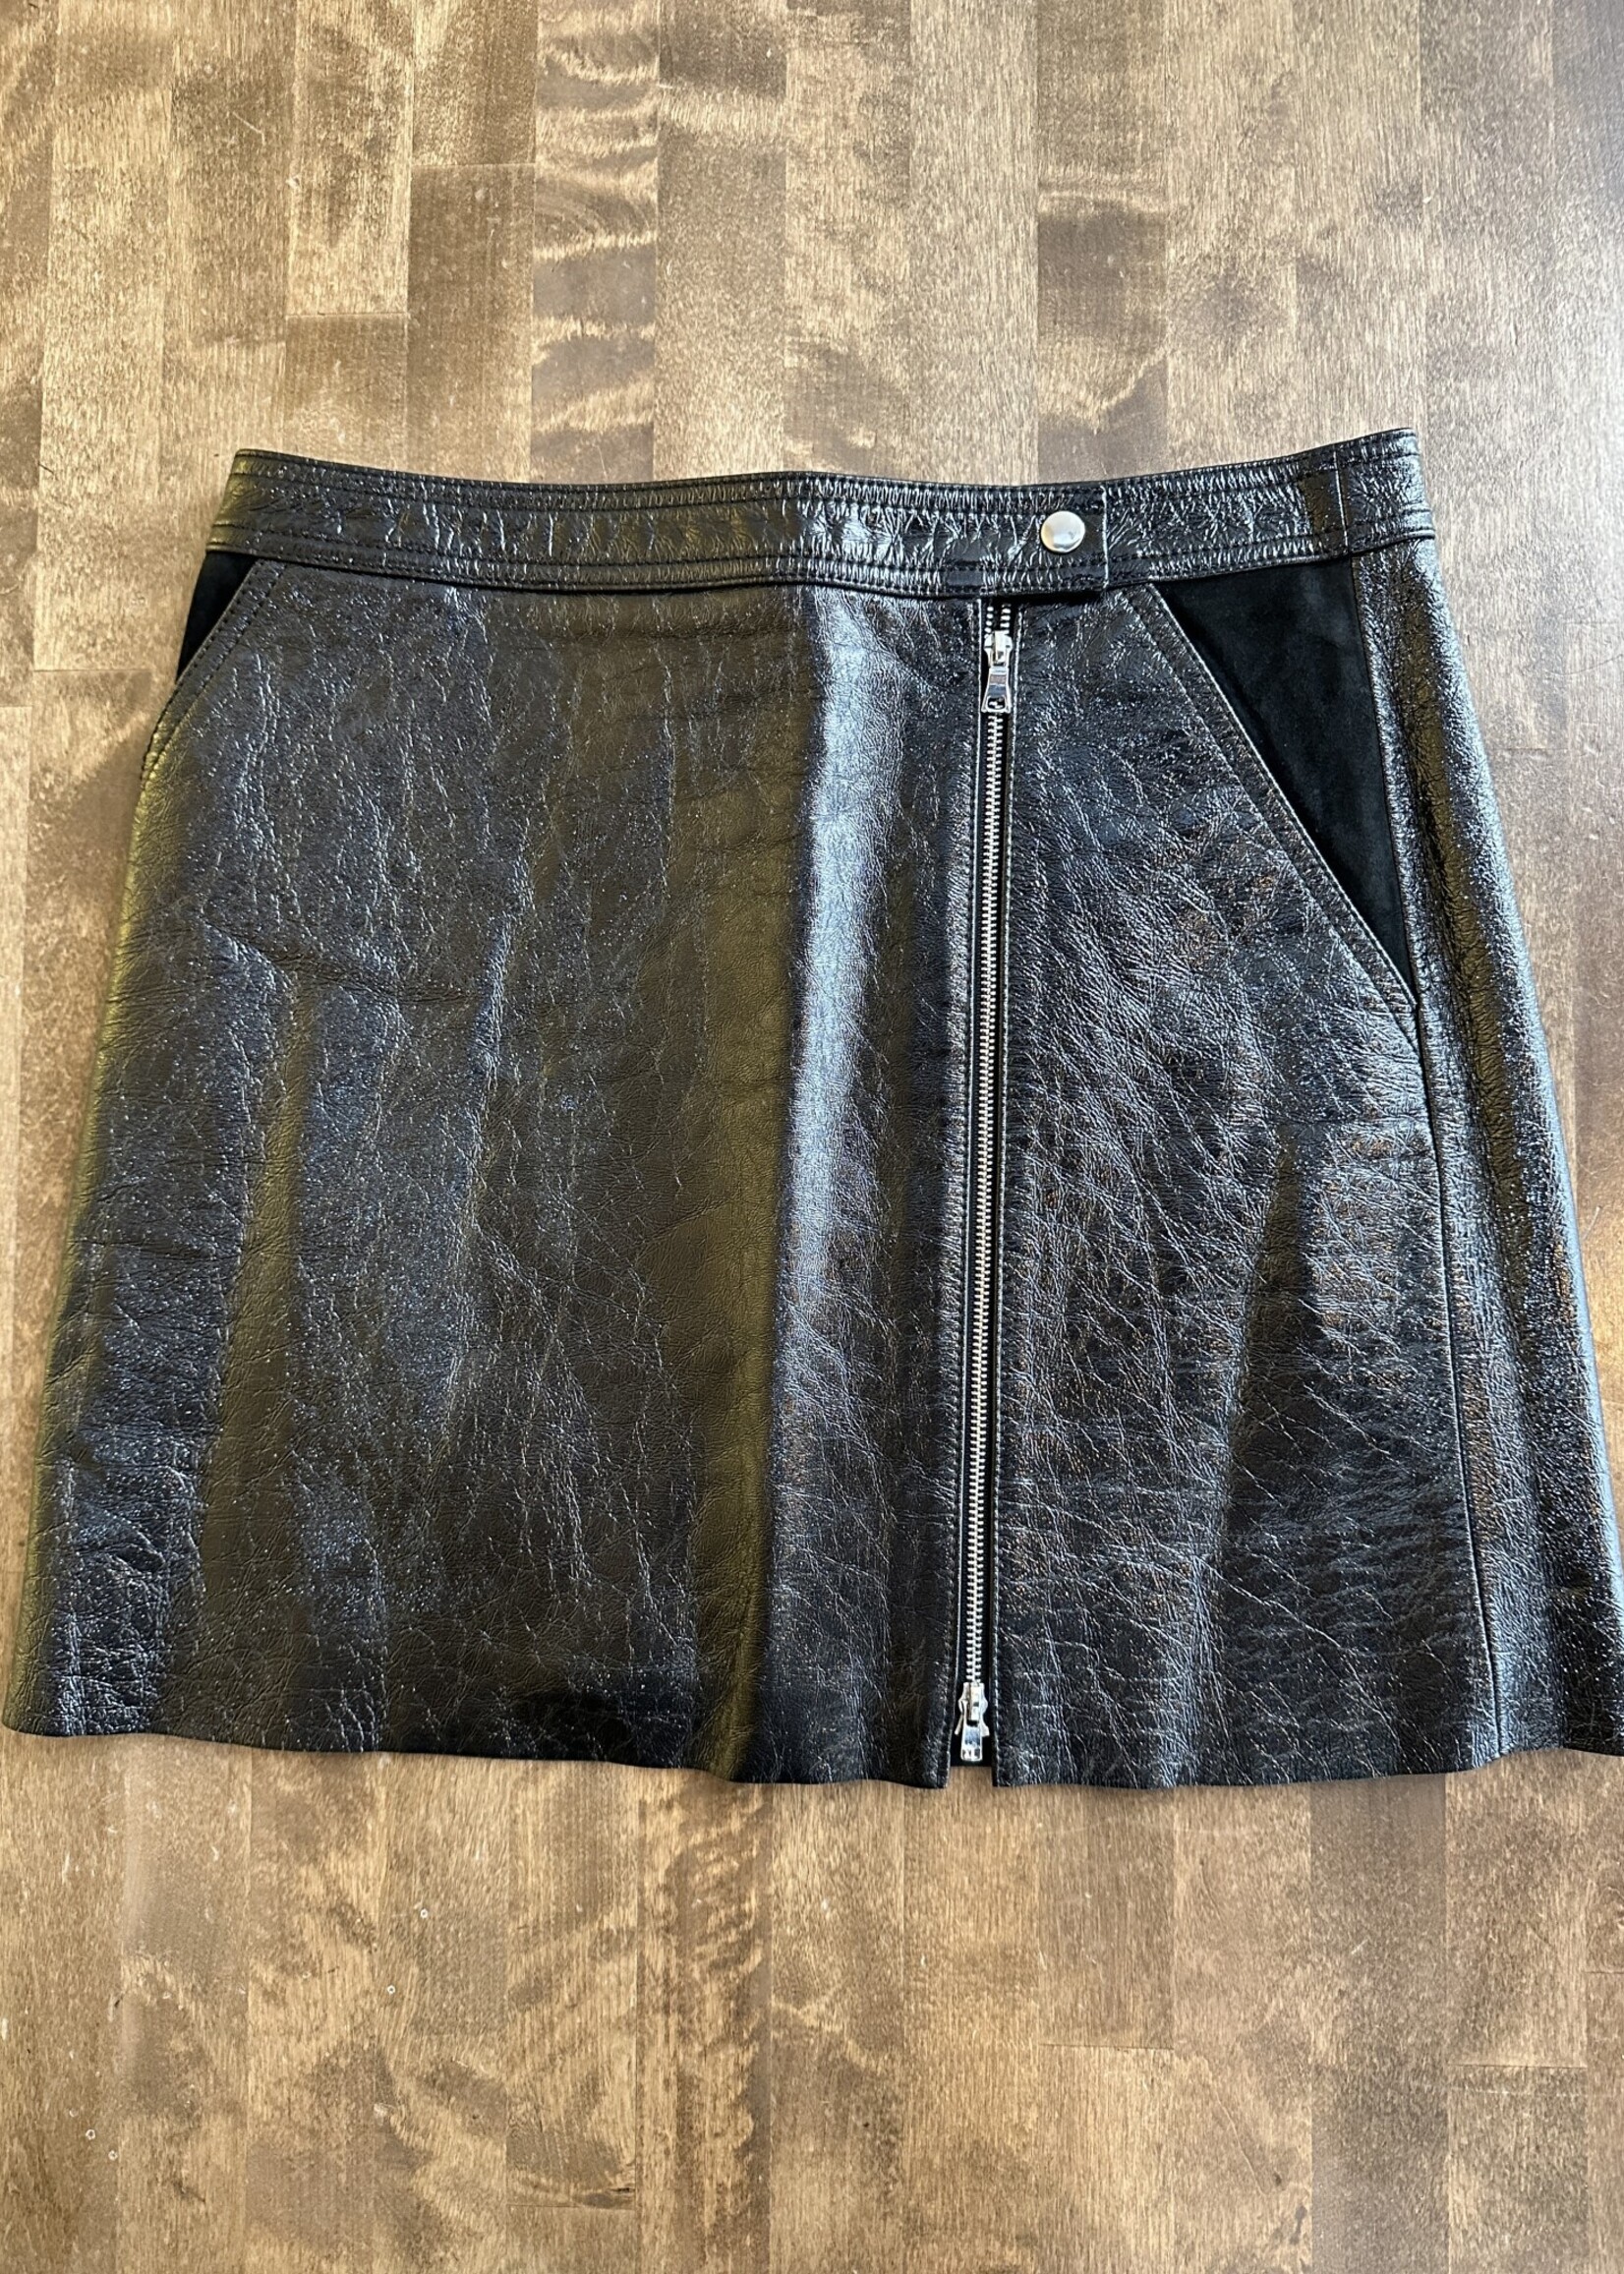 No Label Genuine Leather Textured Skirt 28"